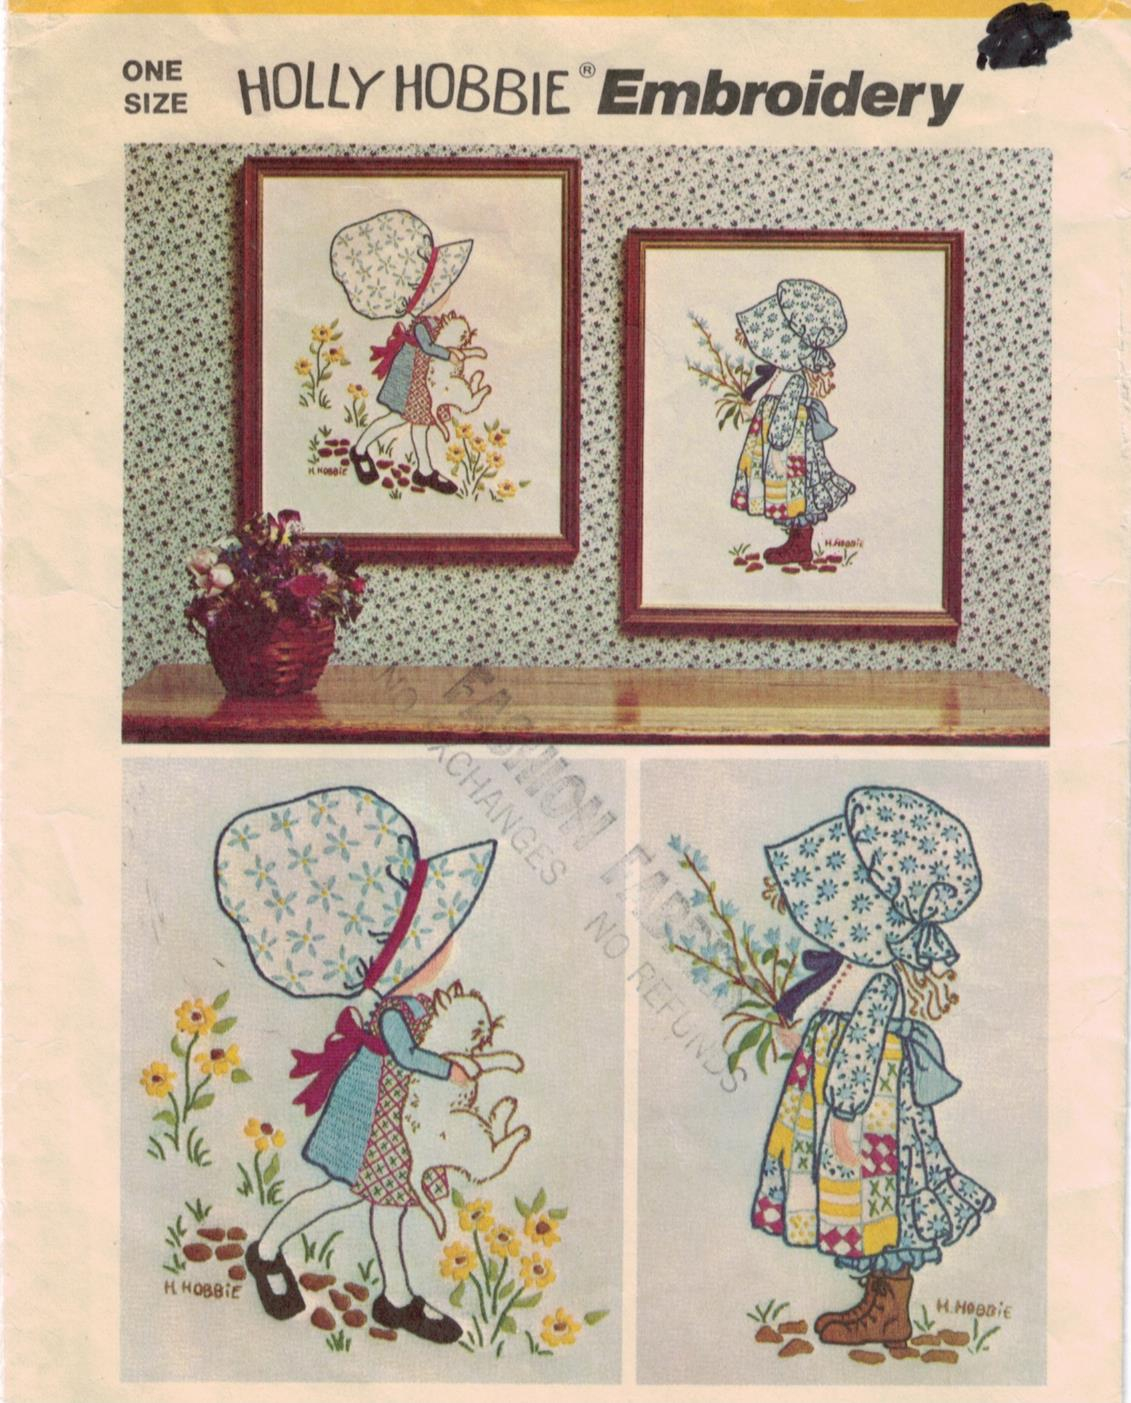 Embroidery Iron On Patterns Simplicity Pattern 6005 Vintage Holly Hobbie Embroidery Pattern